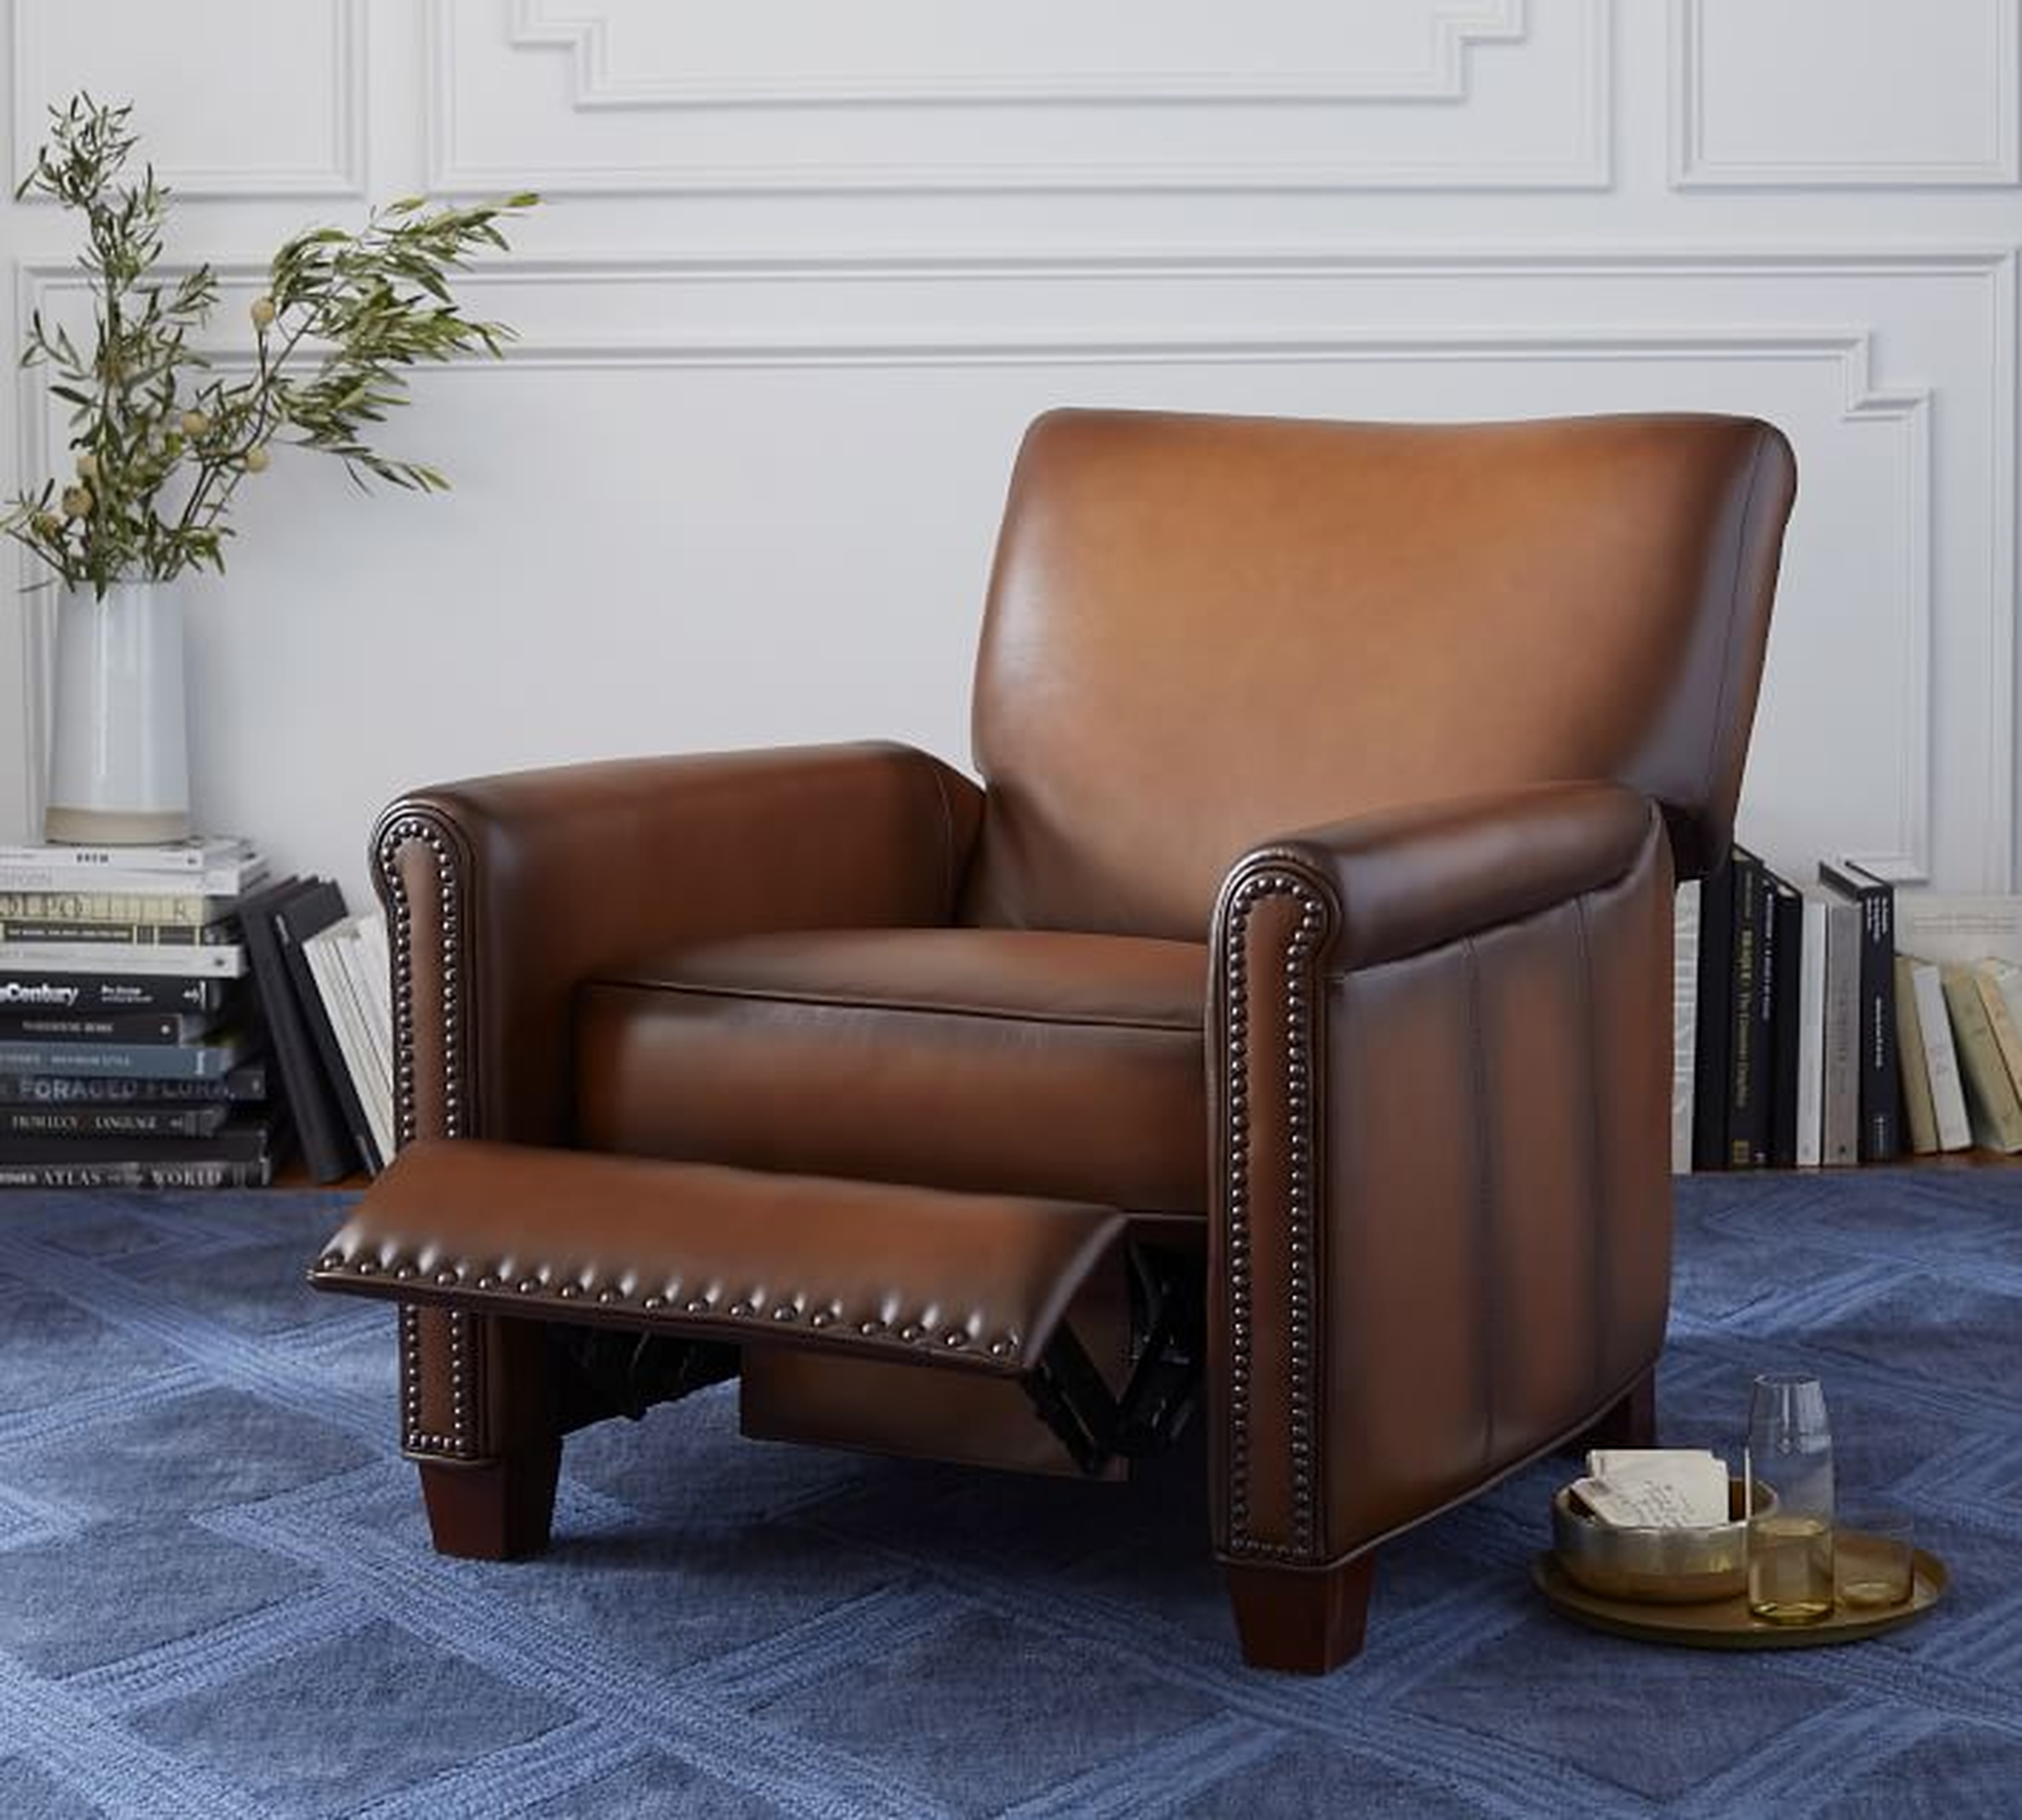 Irving Roll Arm Leather Recliner with Nailheads - Pottery Barn